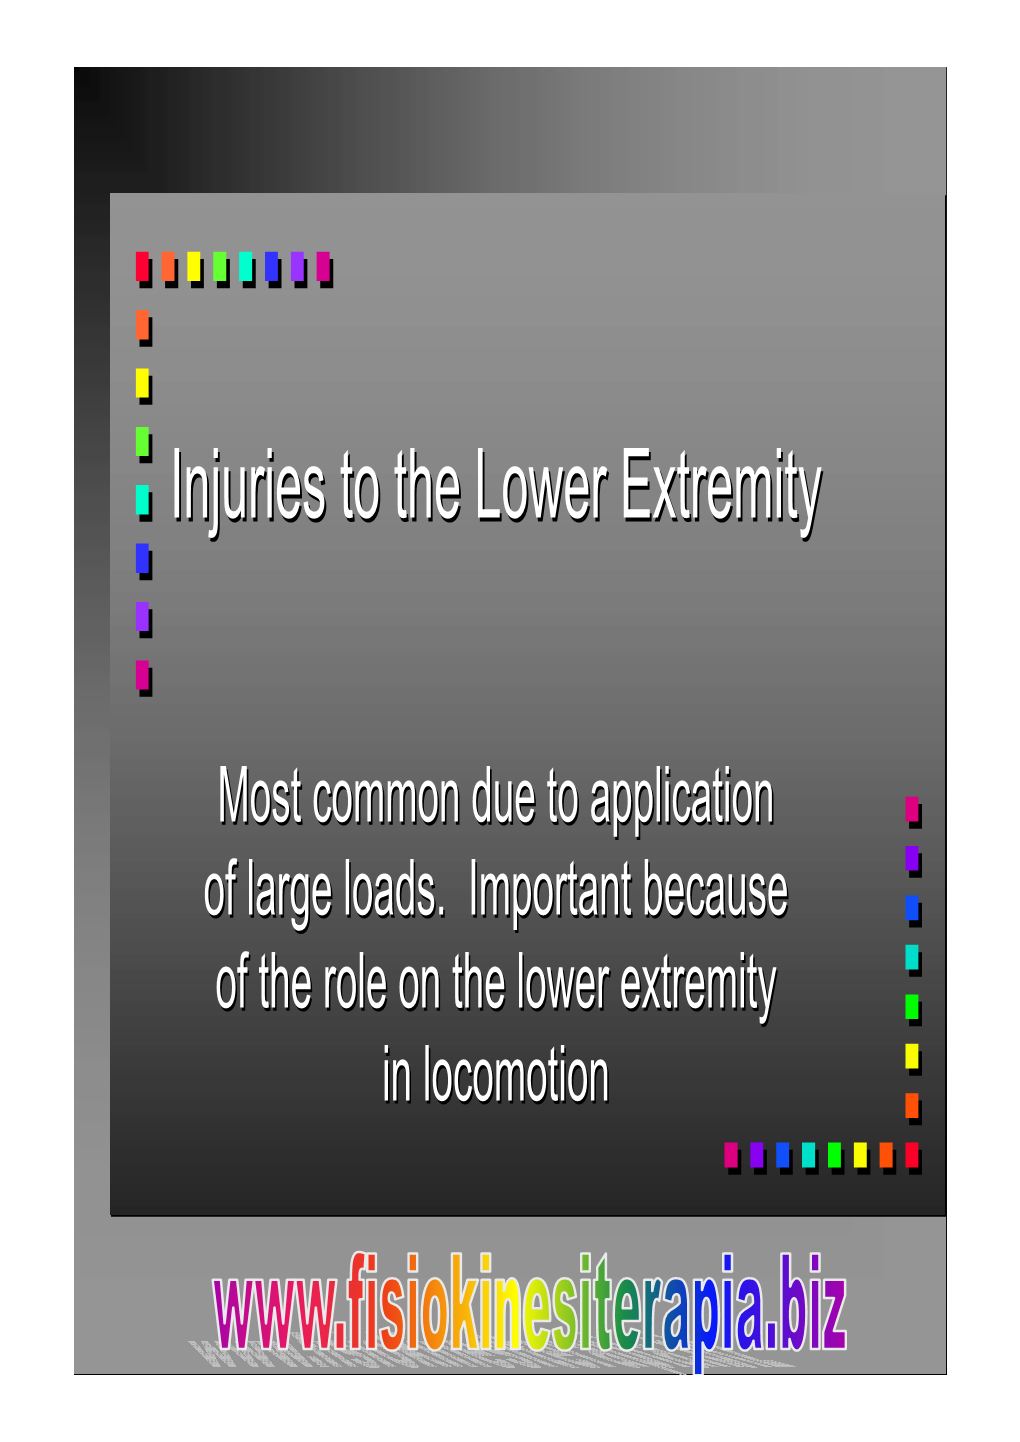 Injuries to the Lower Extremity